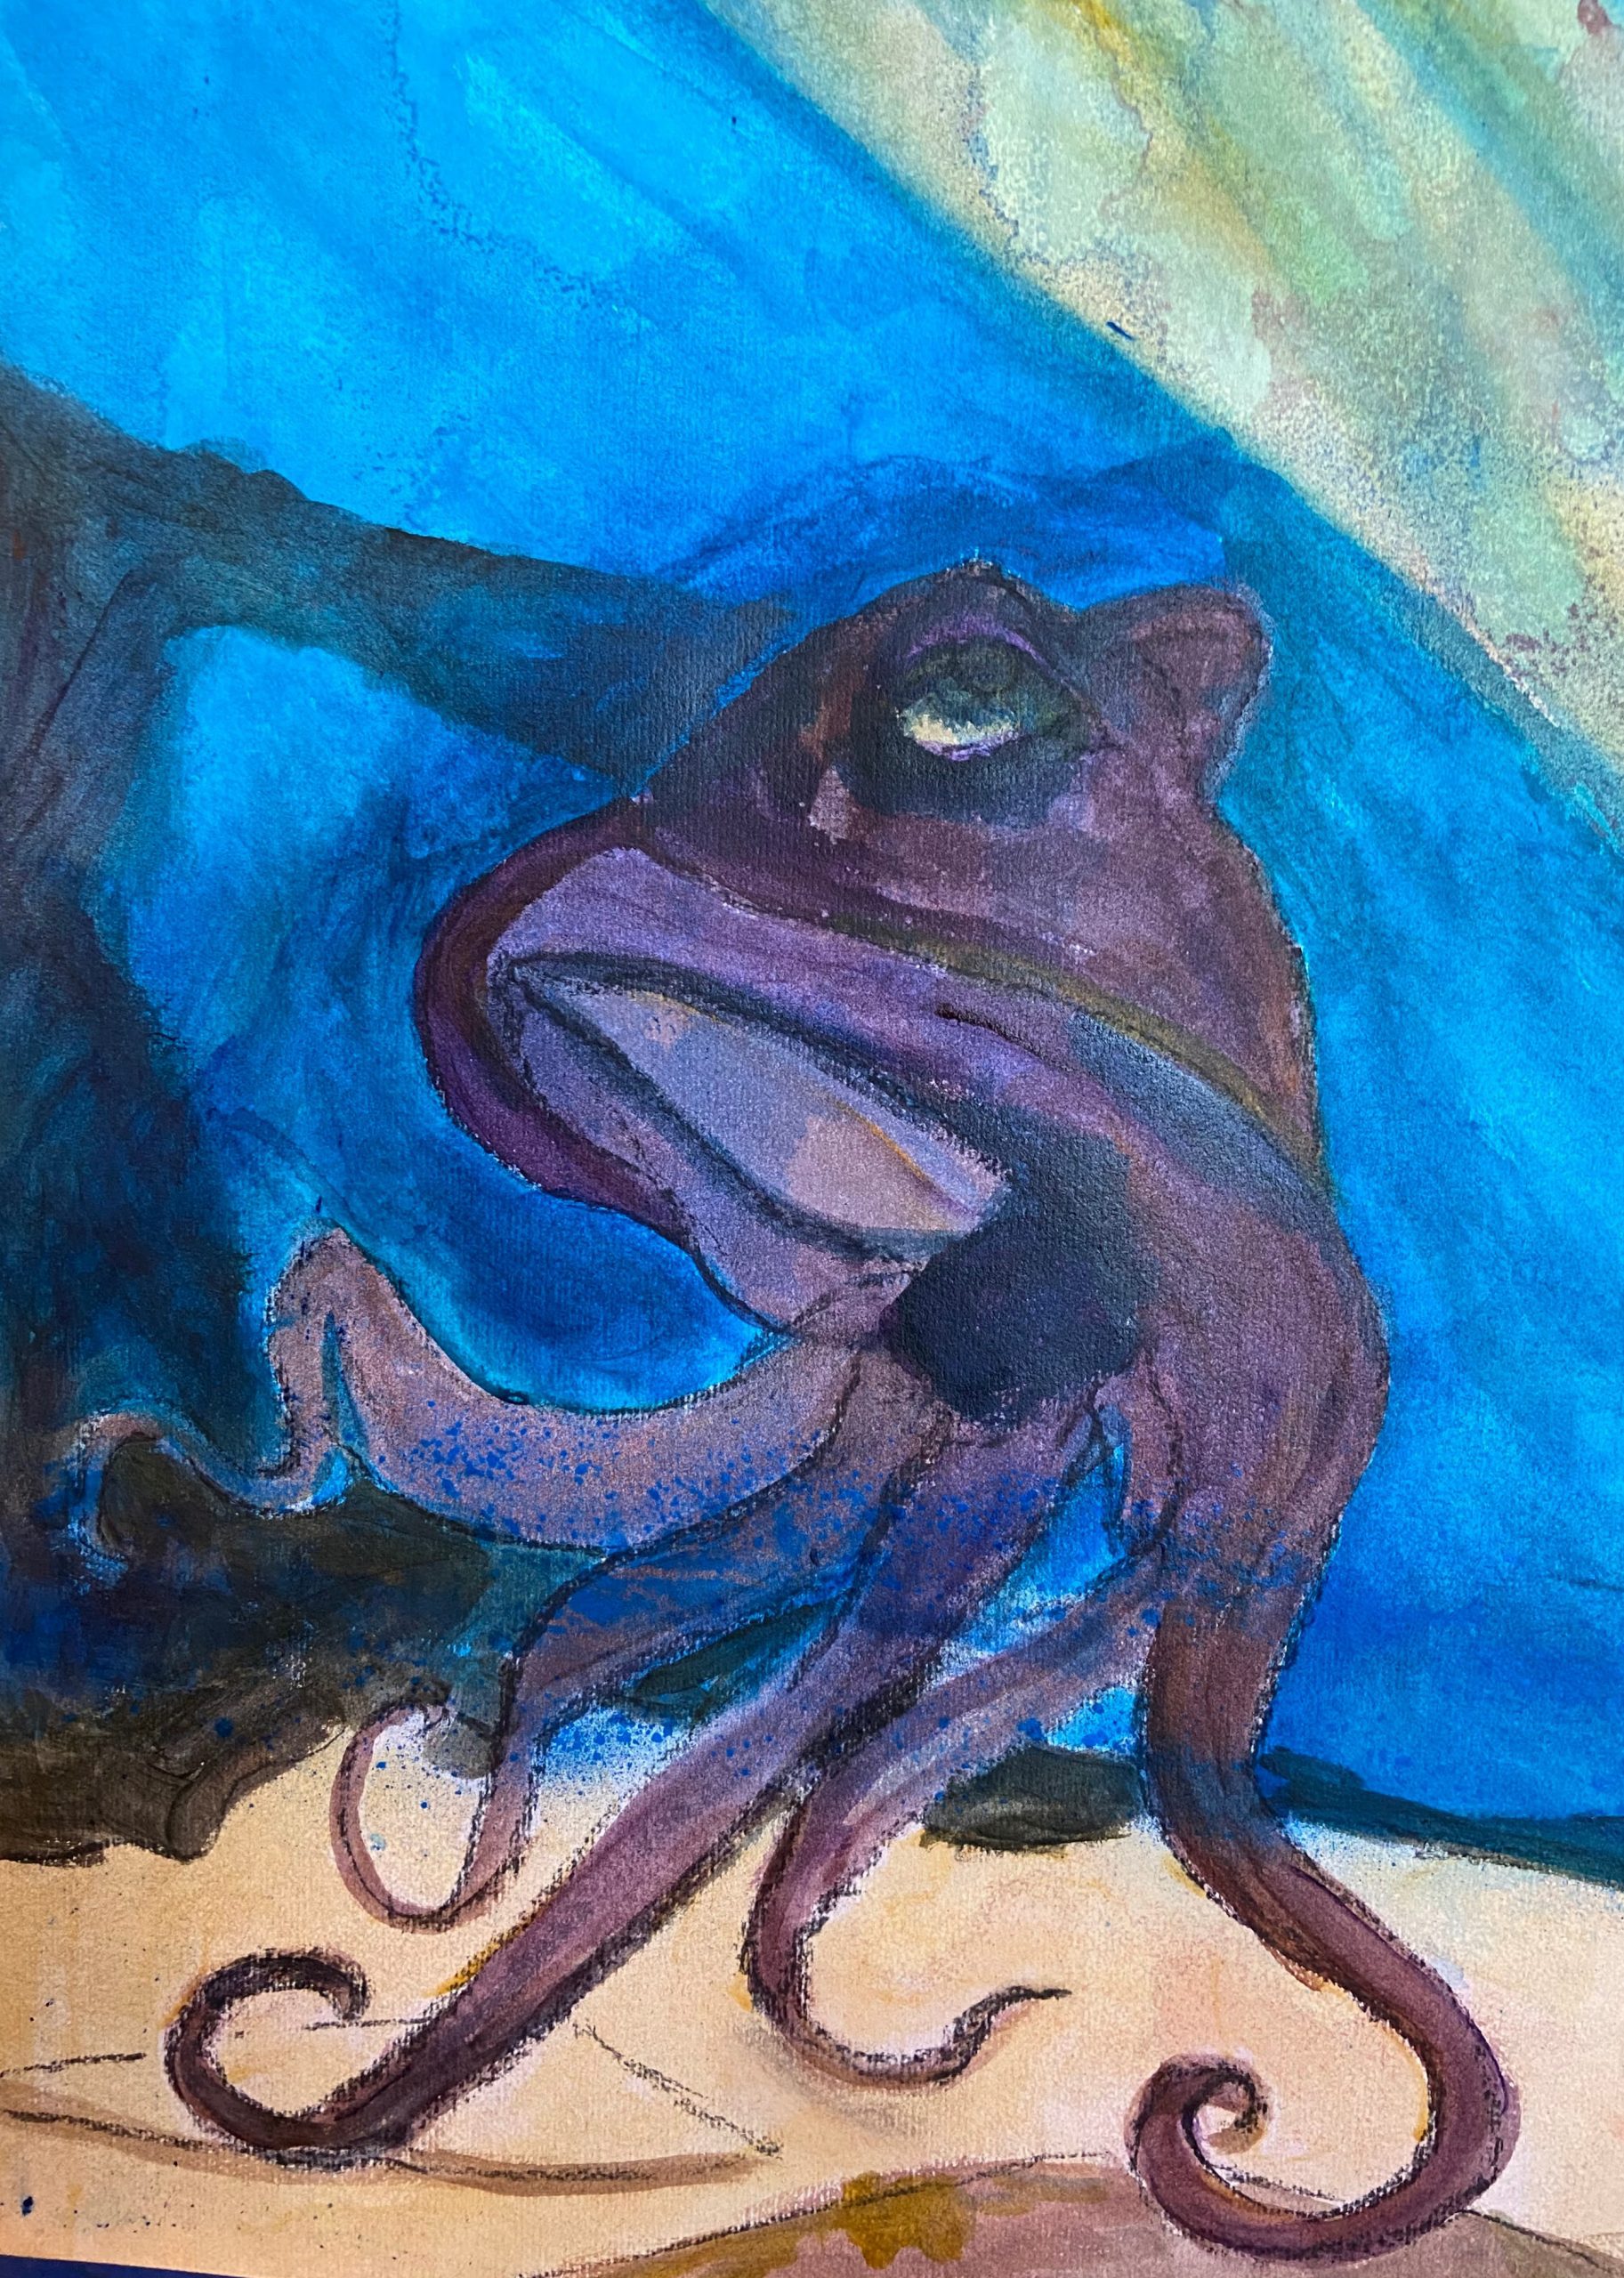 First draft of a painting of an octopus